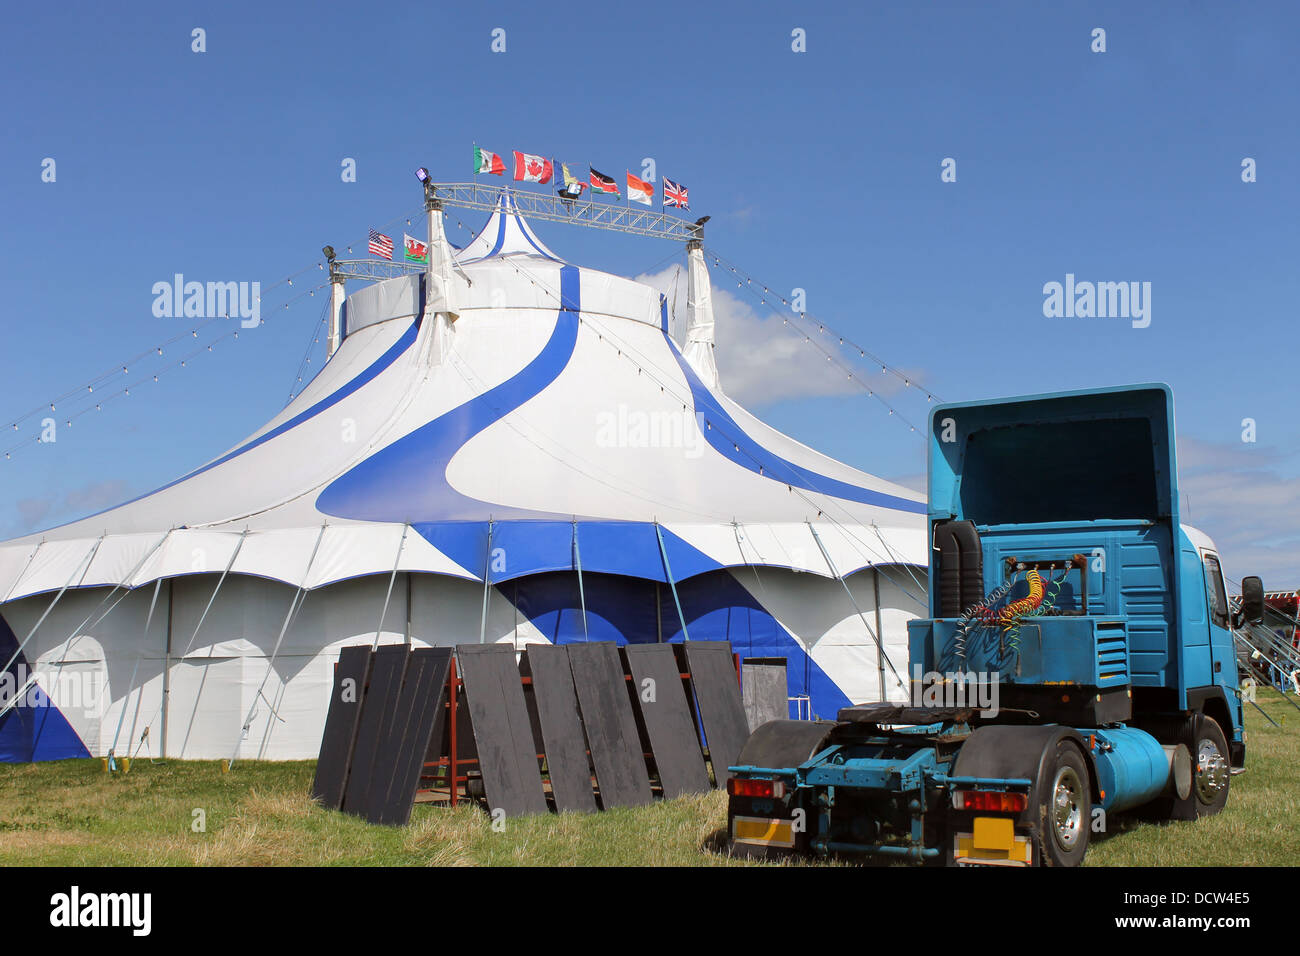 Blue and white circus tent with articulated lorry in foreground. Stock Photo